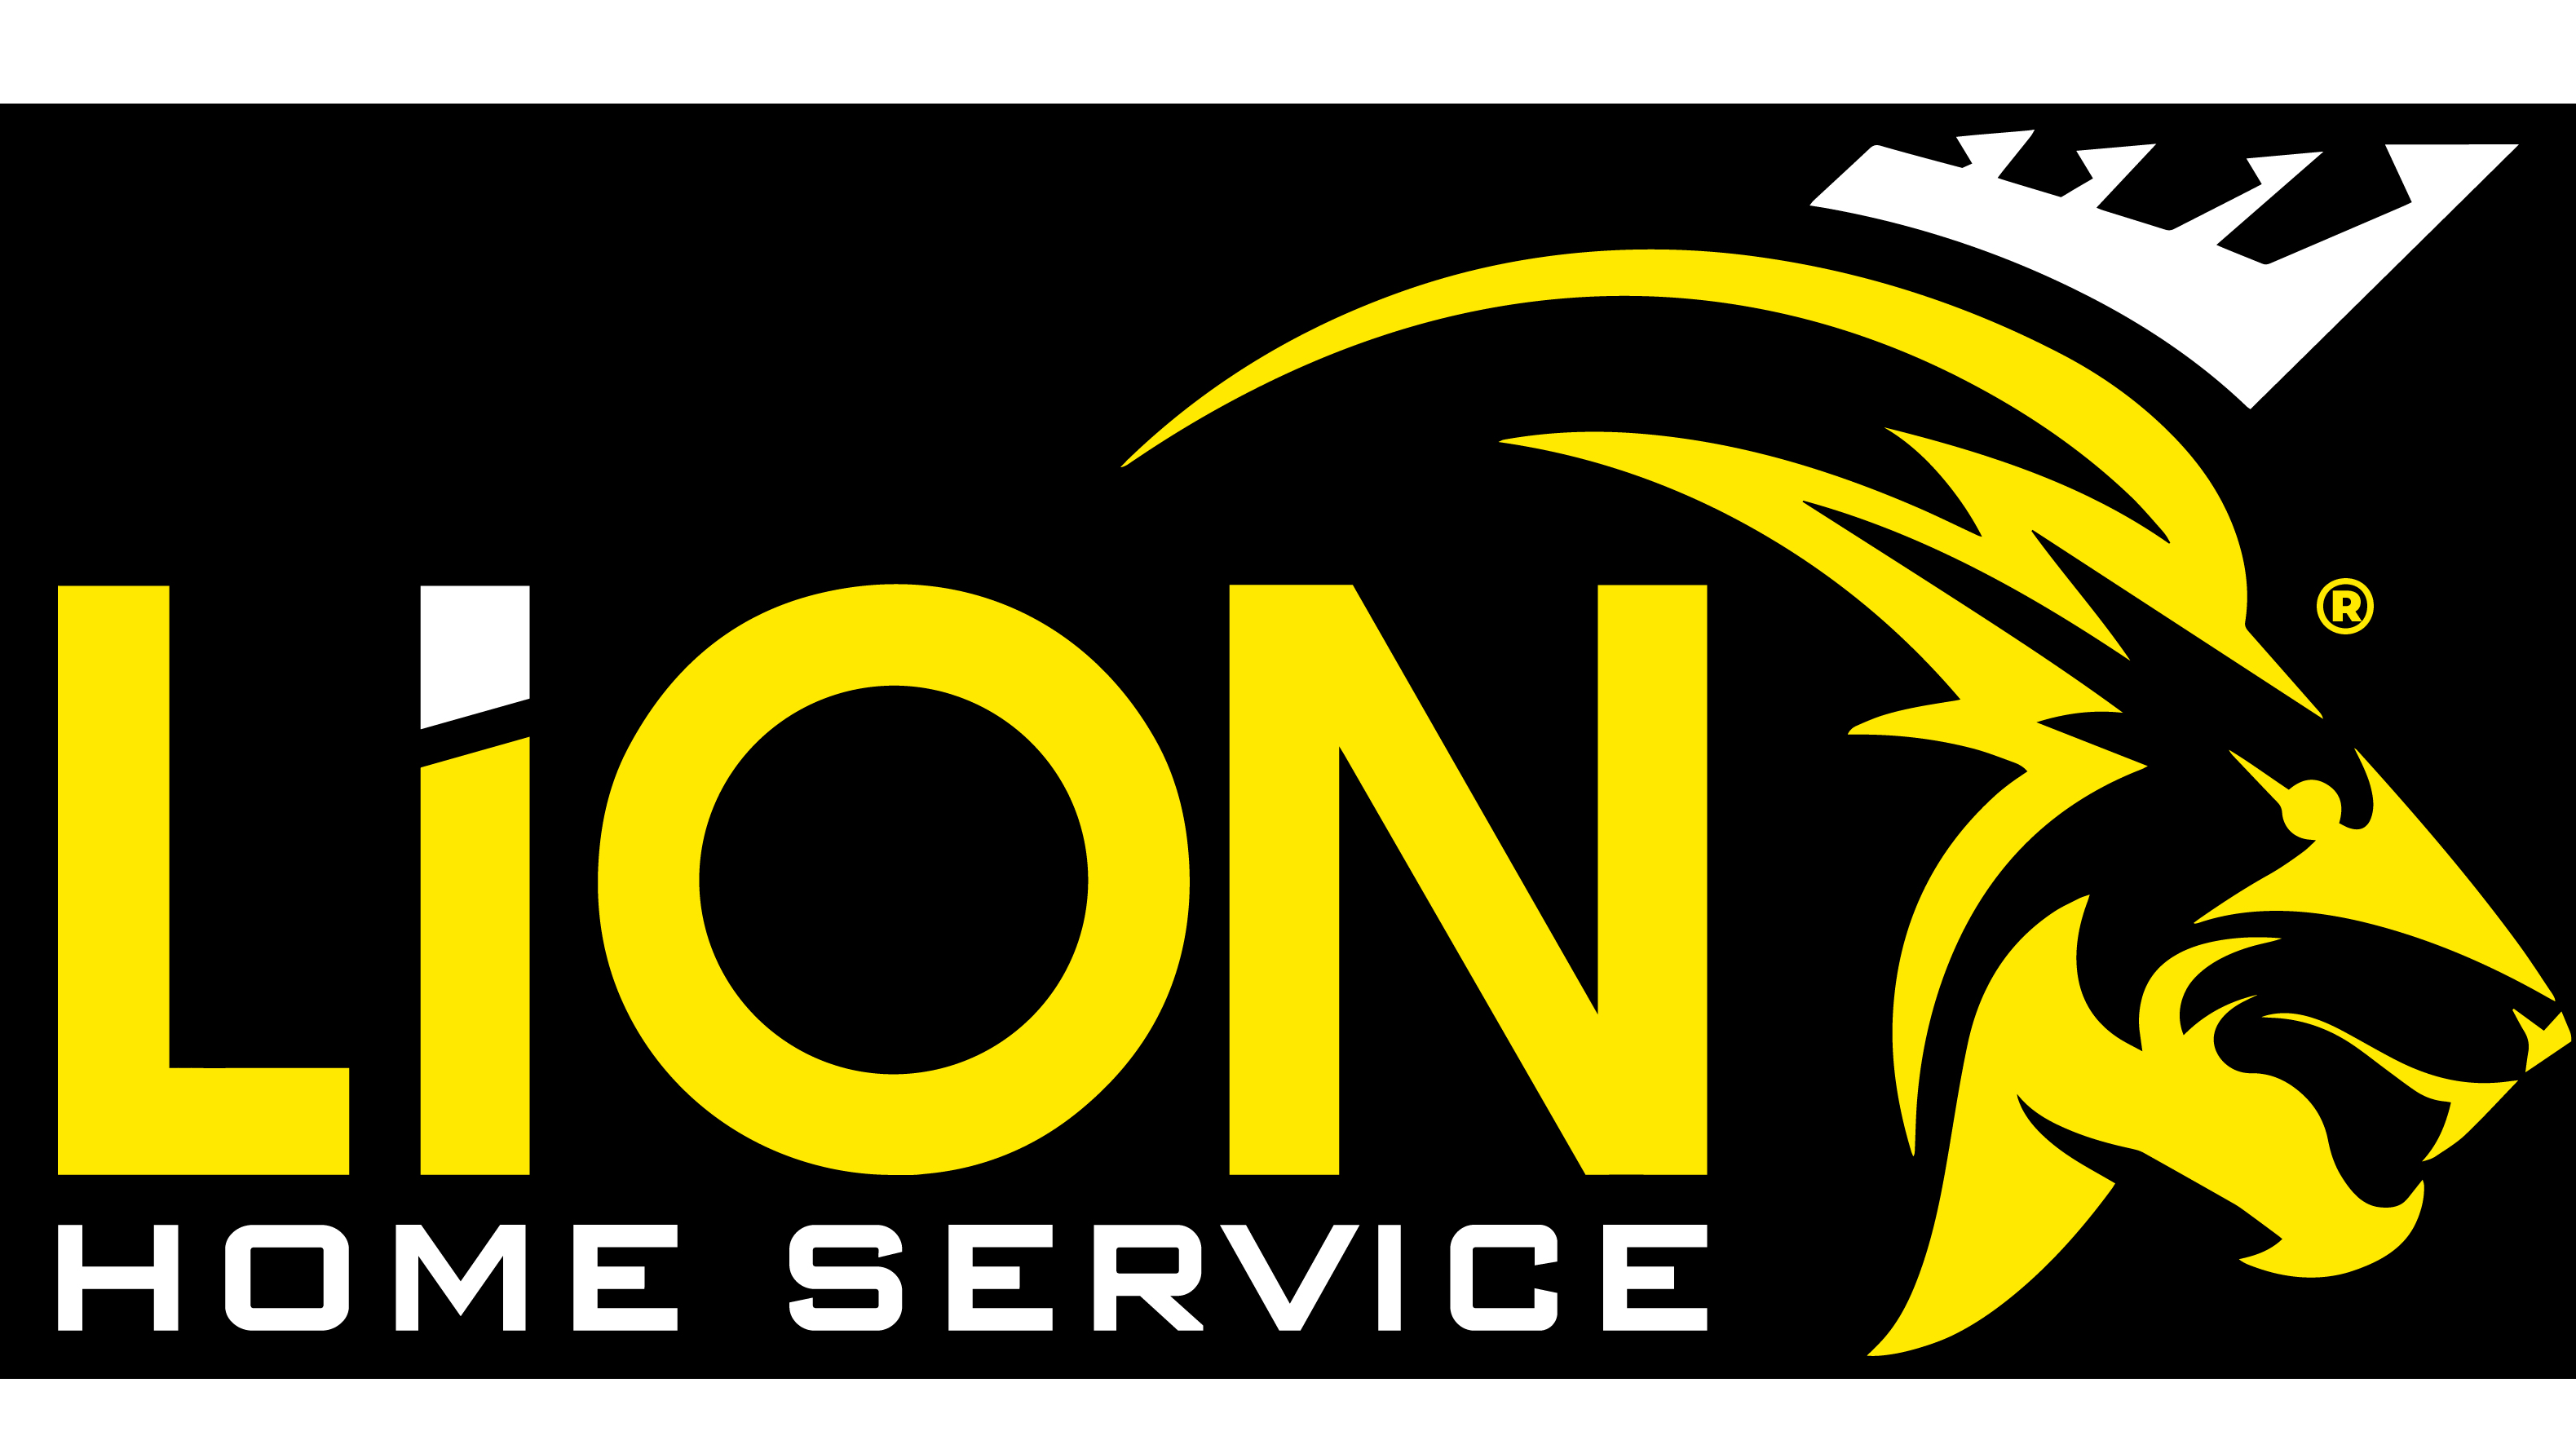 Lion Home Service Ensures Excellent Customer Service And Satisfaction